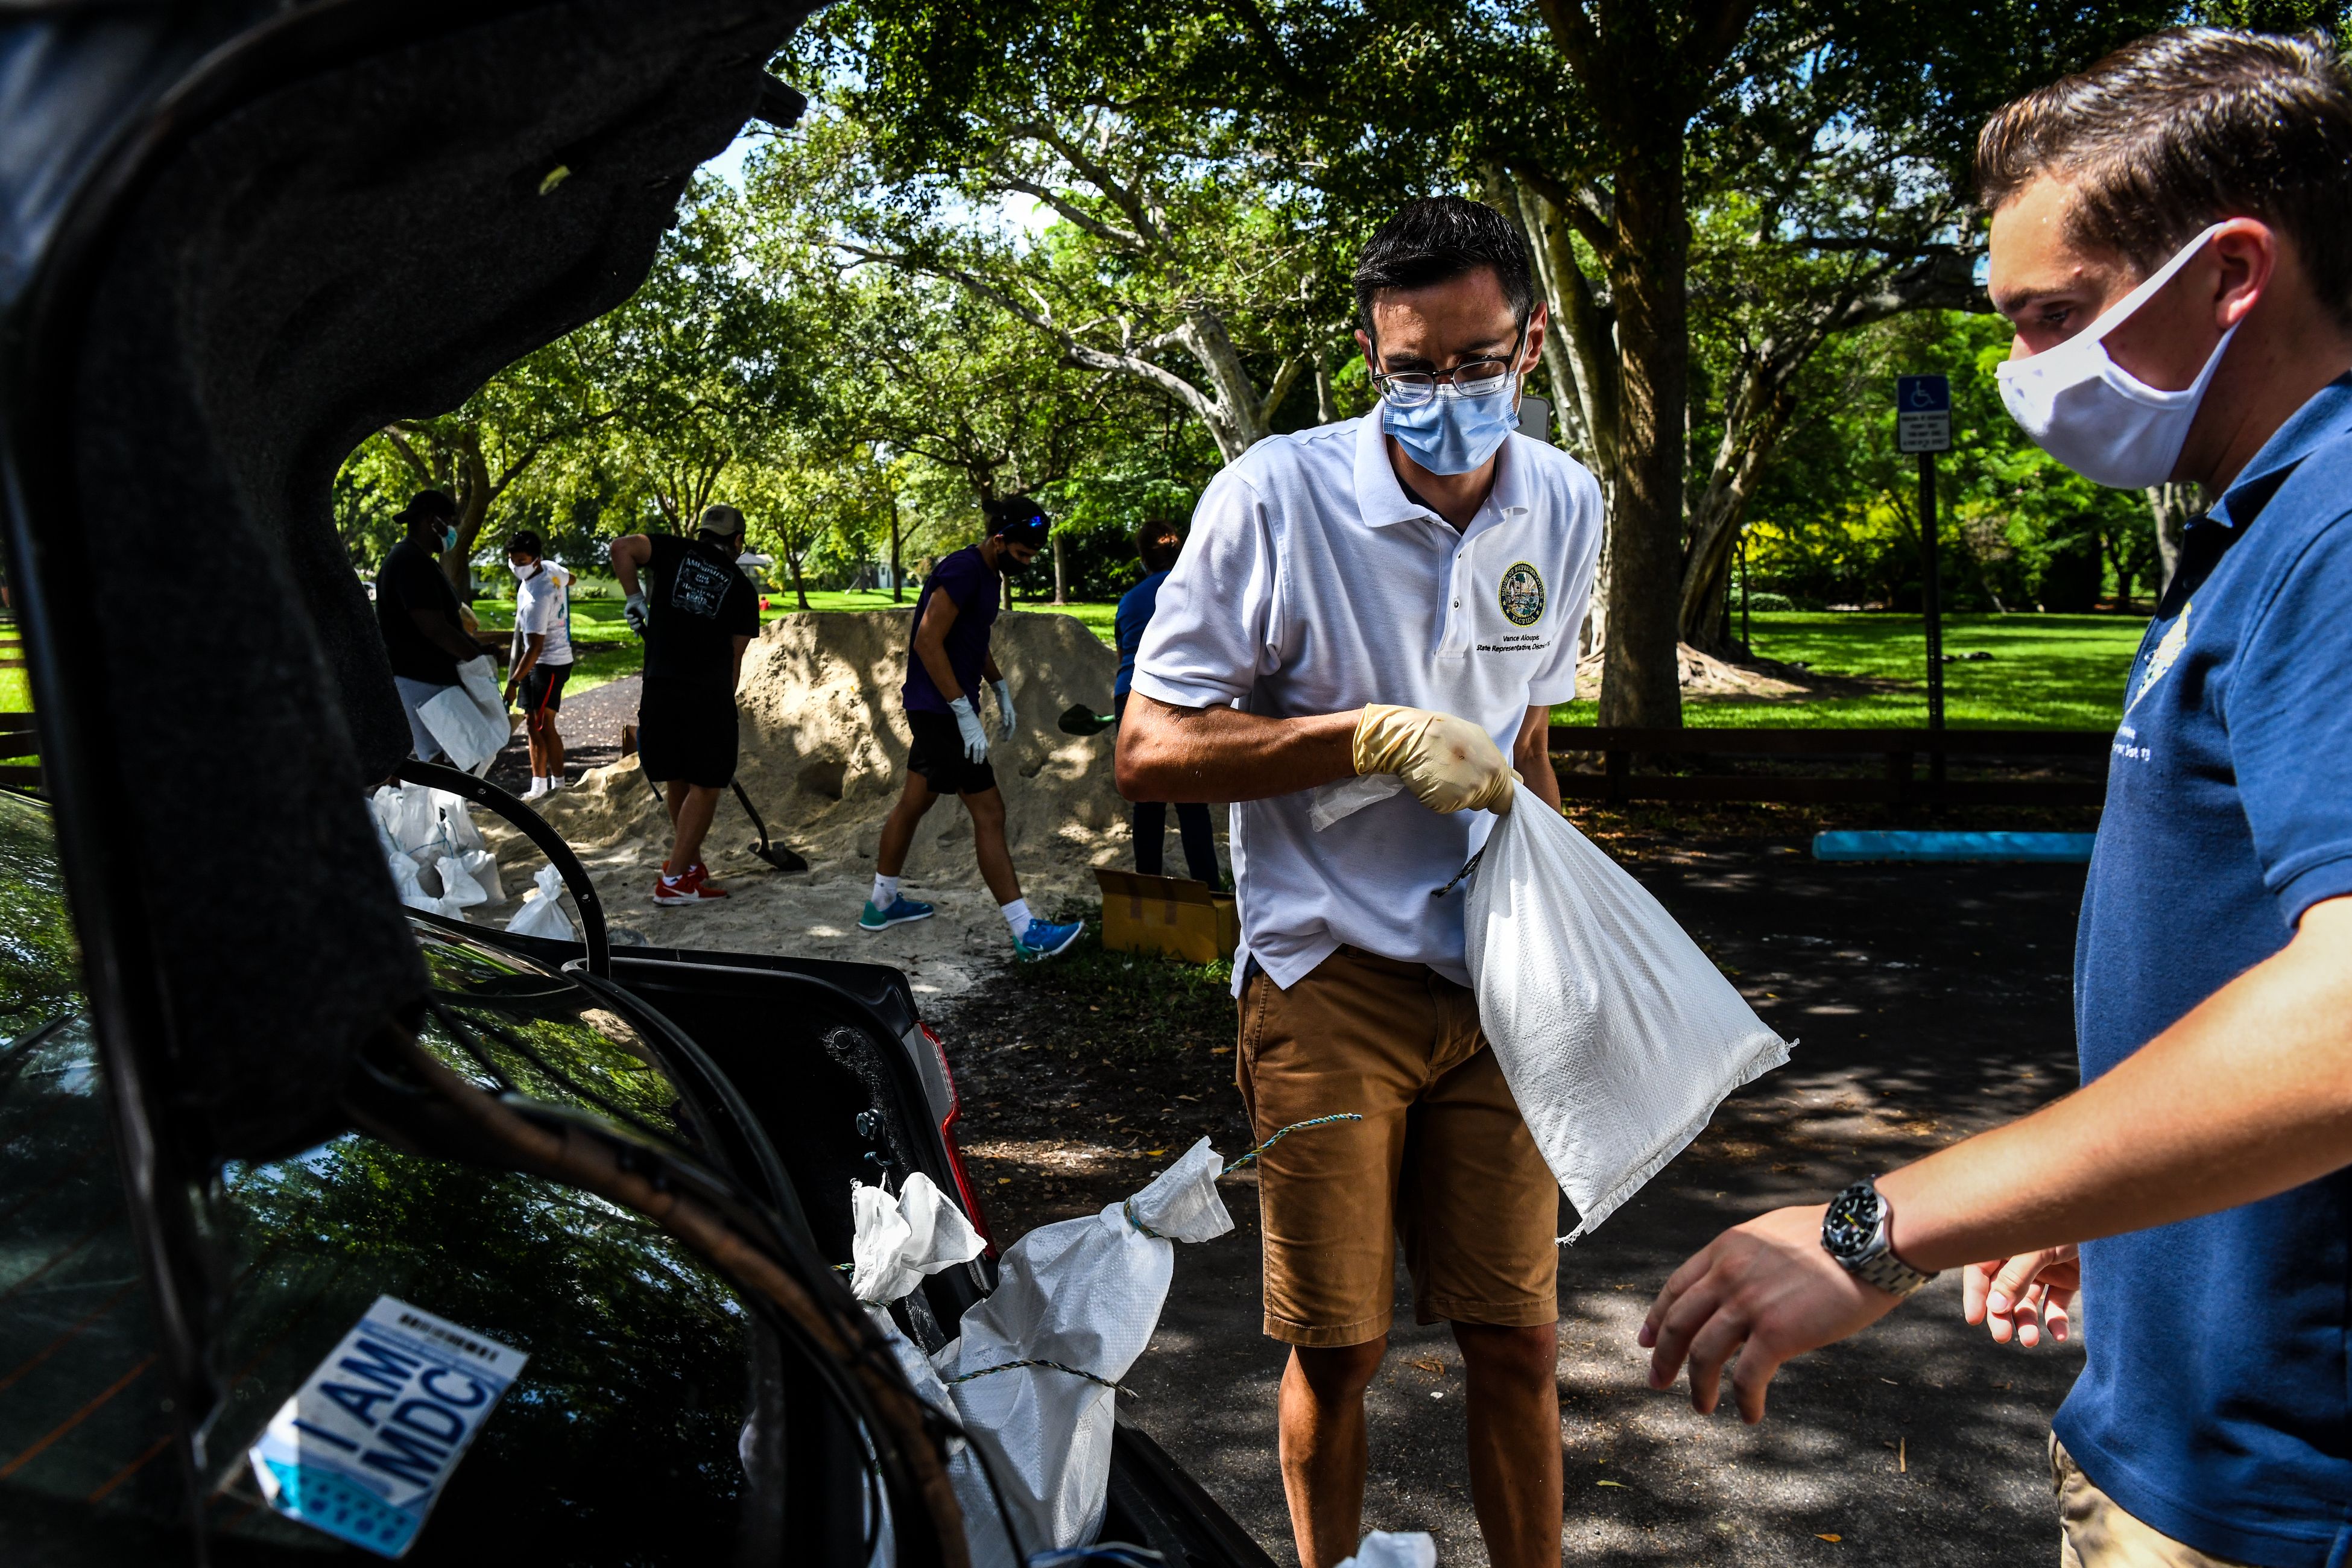 Member of Florida House of Representatives Vance Aloupis (center) puts sand bags in a resident's car trunk in Palmetto Bay near Miami, on Friday as Floridians prepare for Hurricane Isaias.